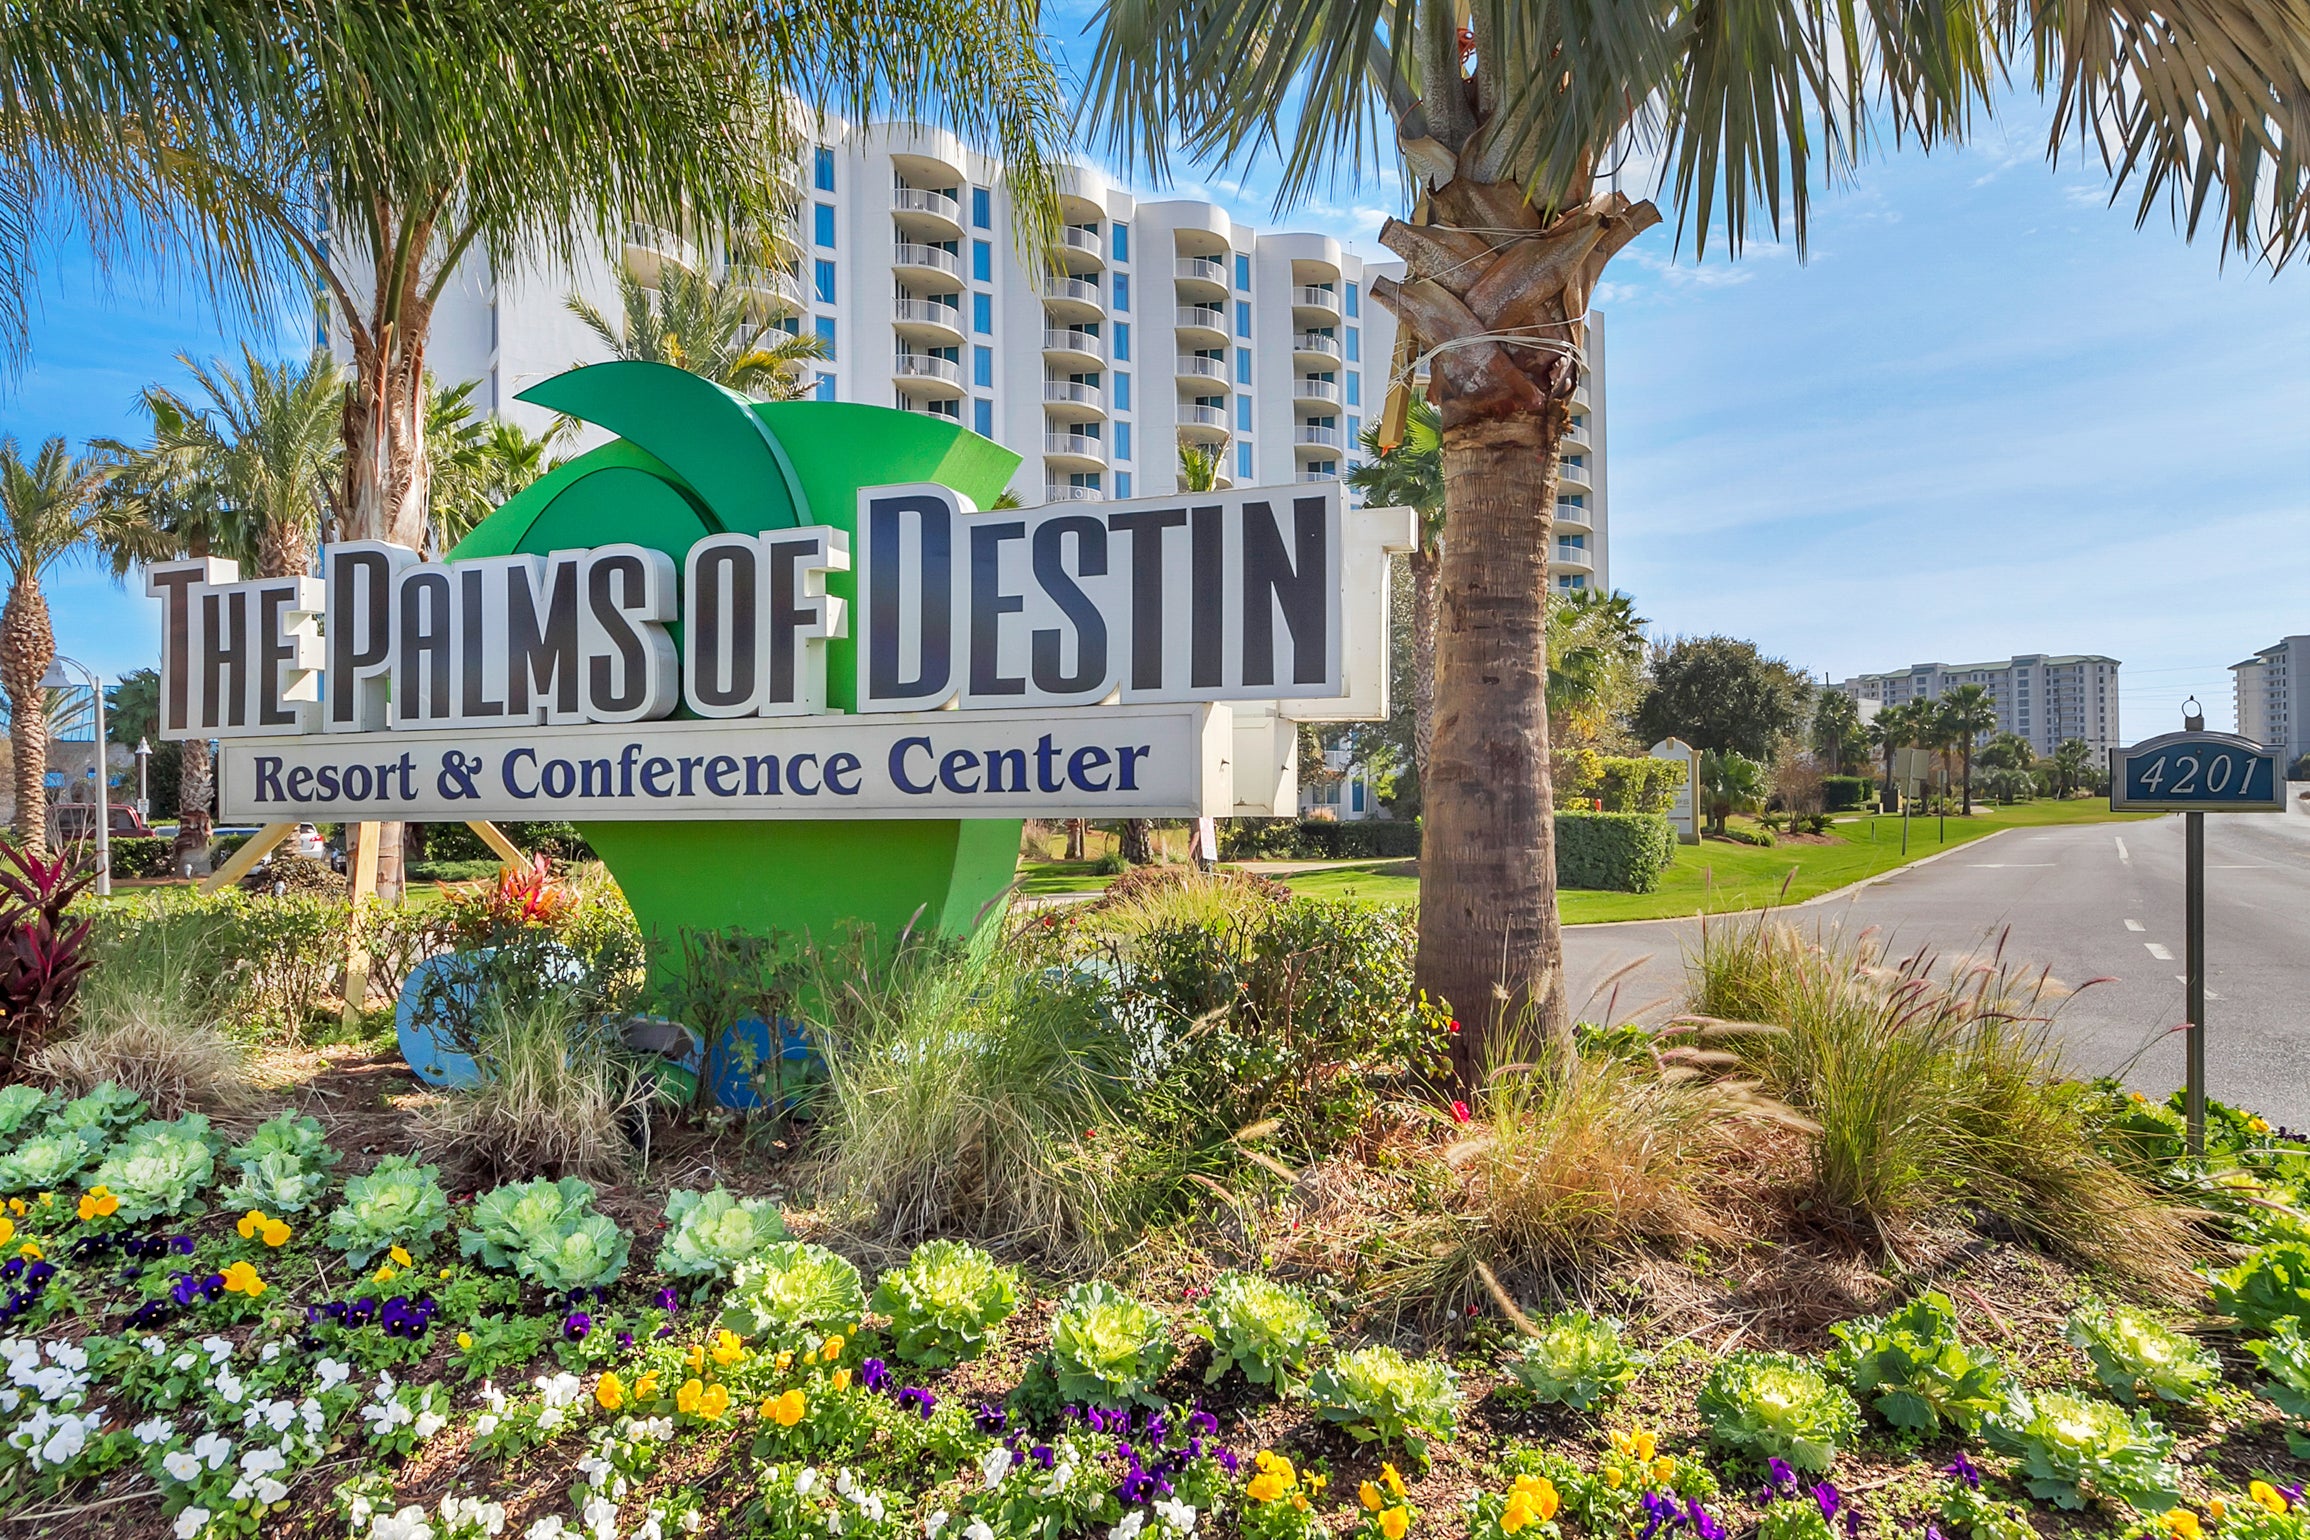 Welcome to The Palms of Destin